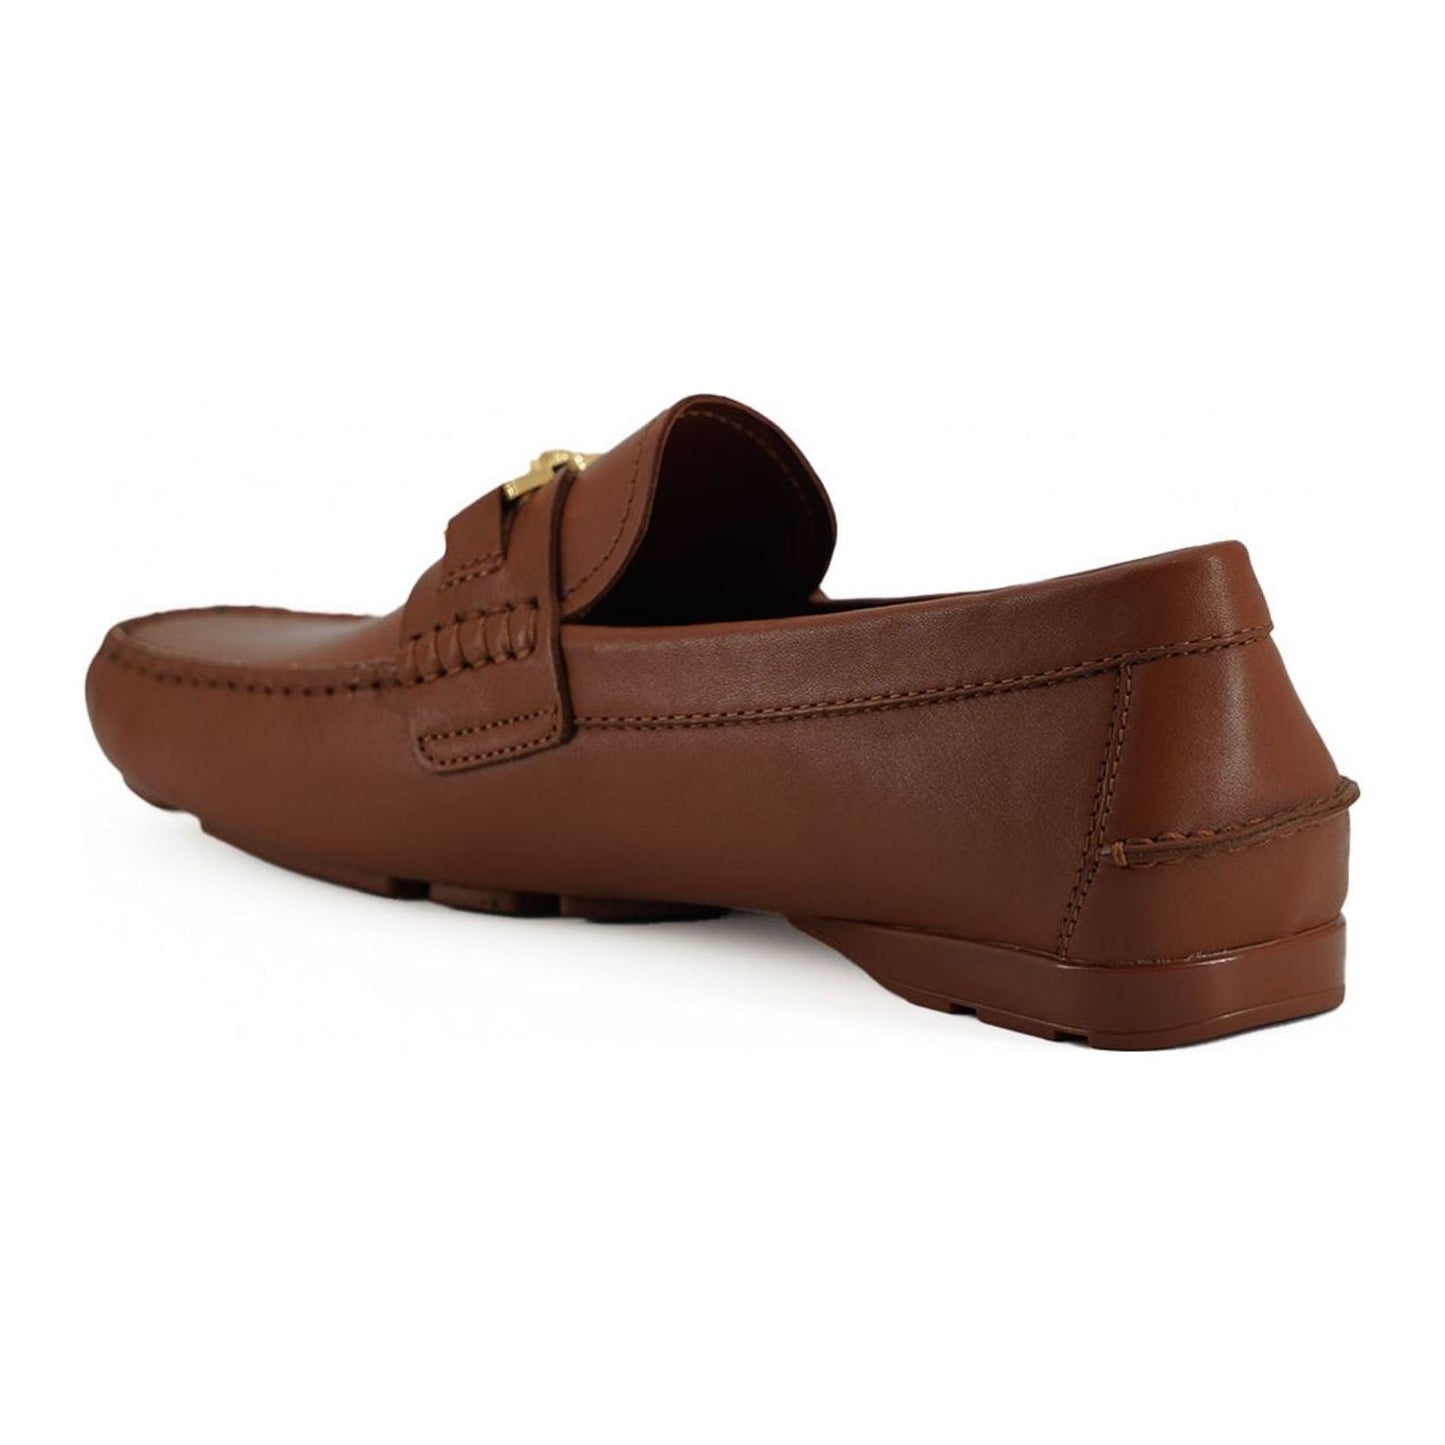 Versace Elegant Medusa-Embossed Leather Loafers natural-brown-calf-leather-loafers-shoes